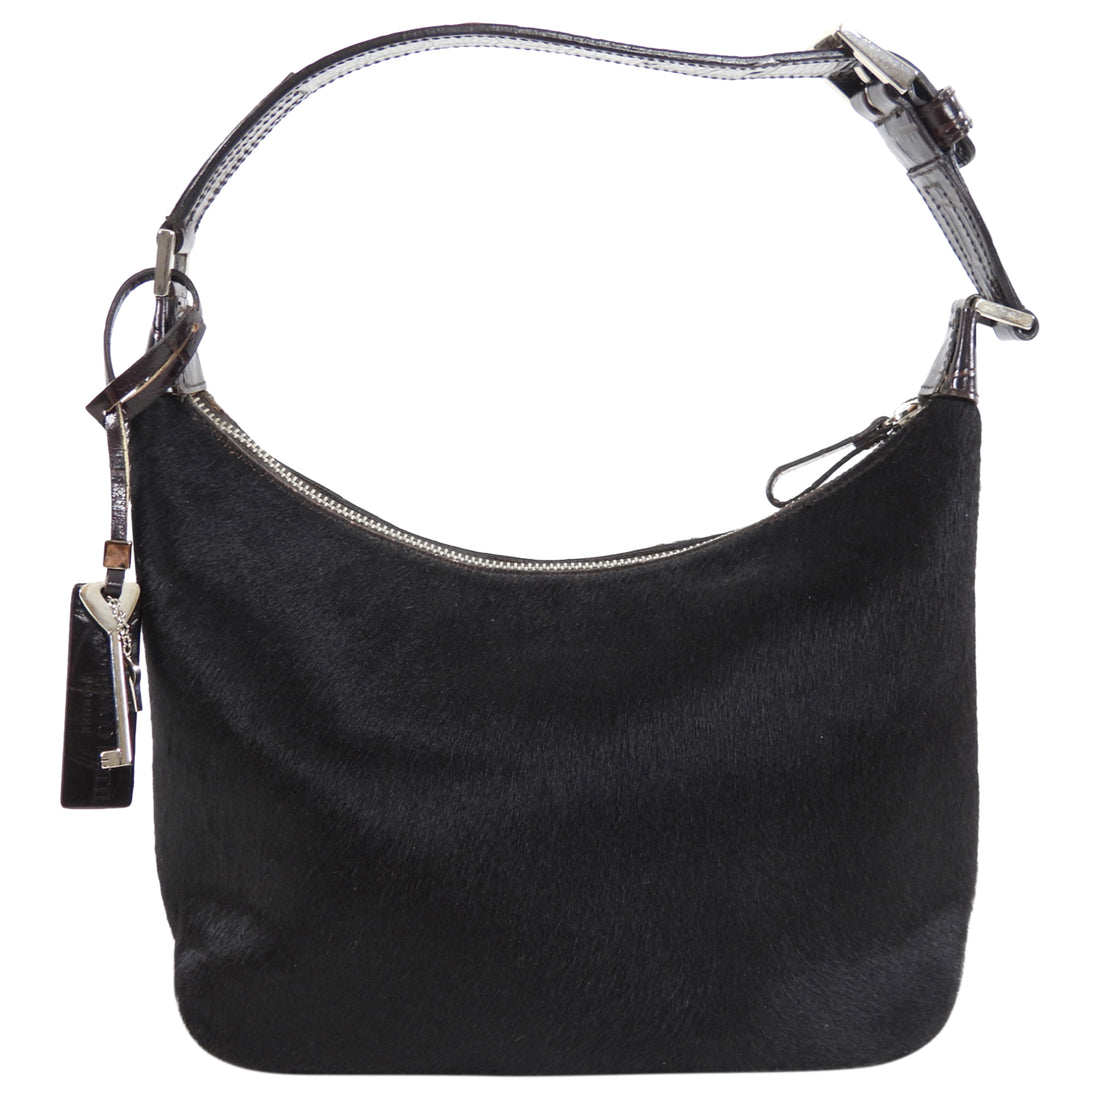 Gianfranco Lotti Embossed Leather and Calf Hair Pochette Bag